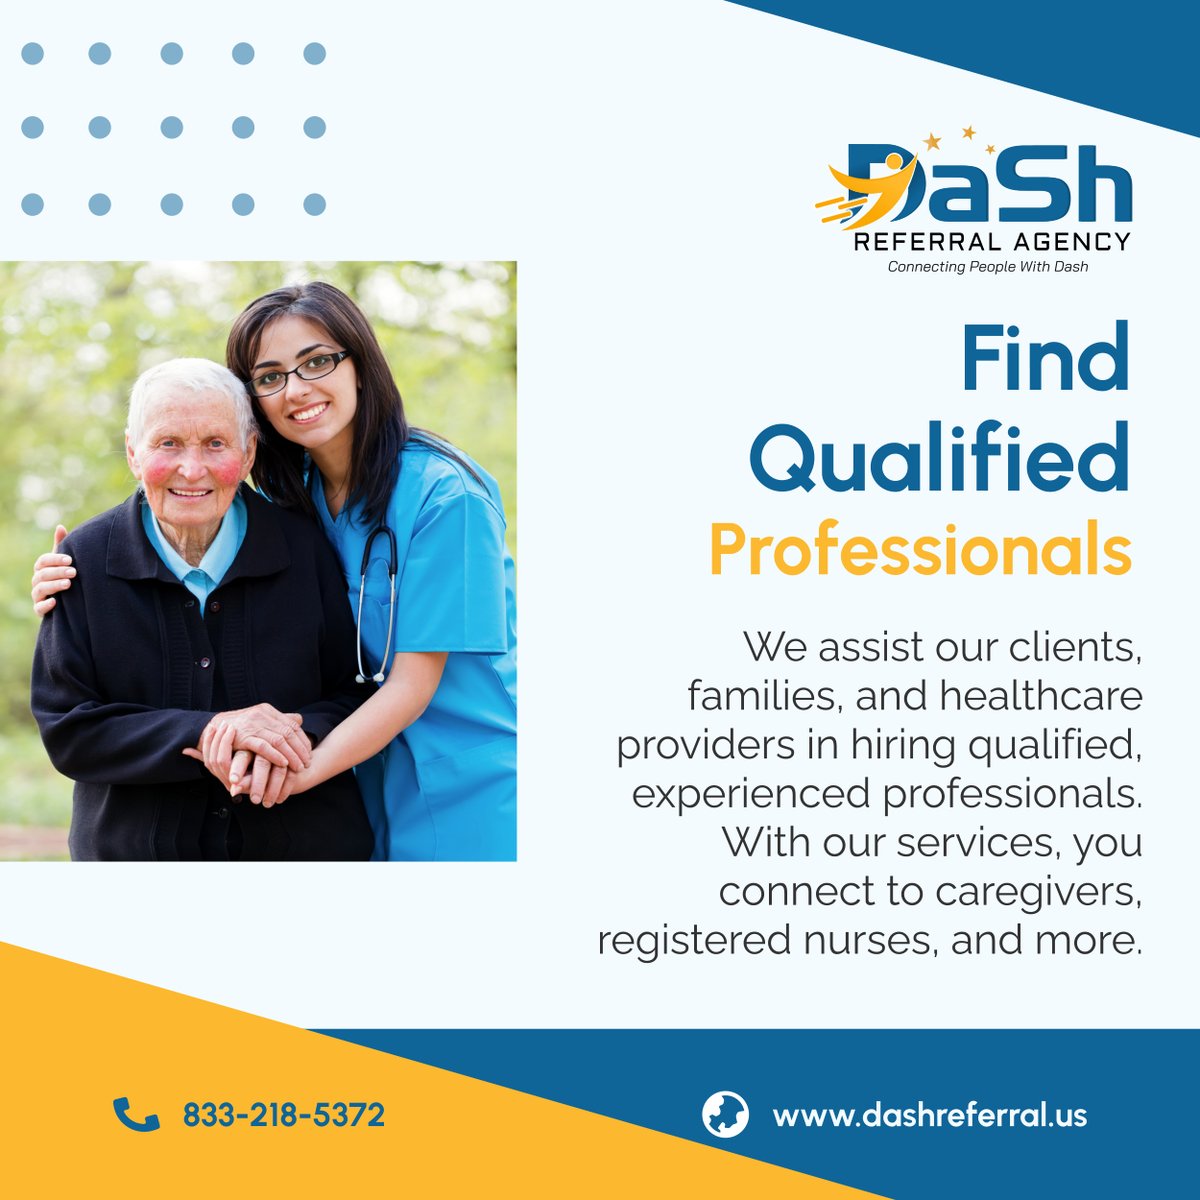 We specialize in connecting you with qualified staff members who are dedicated to delivering top-notch care and services. This promotes optimal outcomes and exceptional care for your loved ones.

#DashReferralAgency #IrvineCA #QualifiedProfessionals